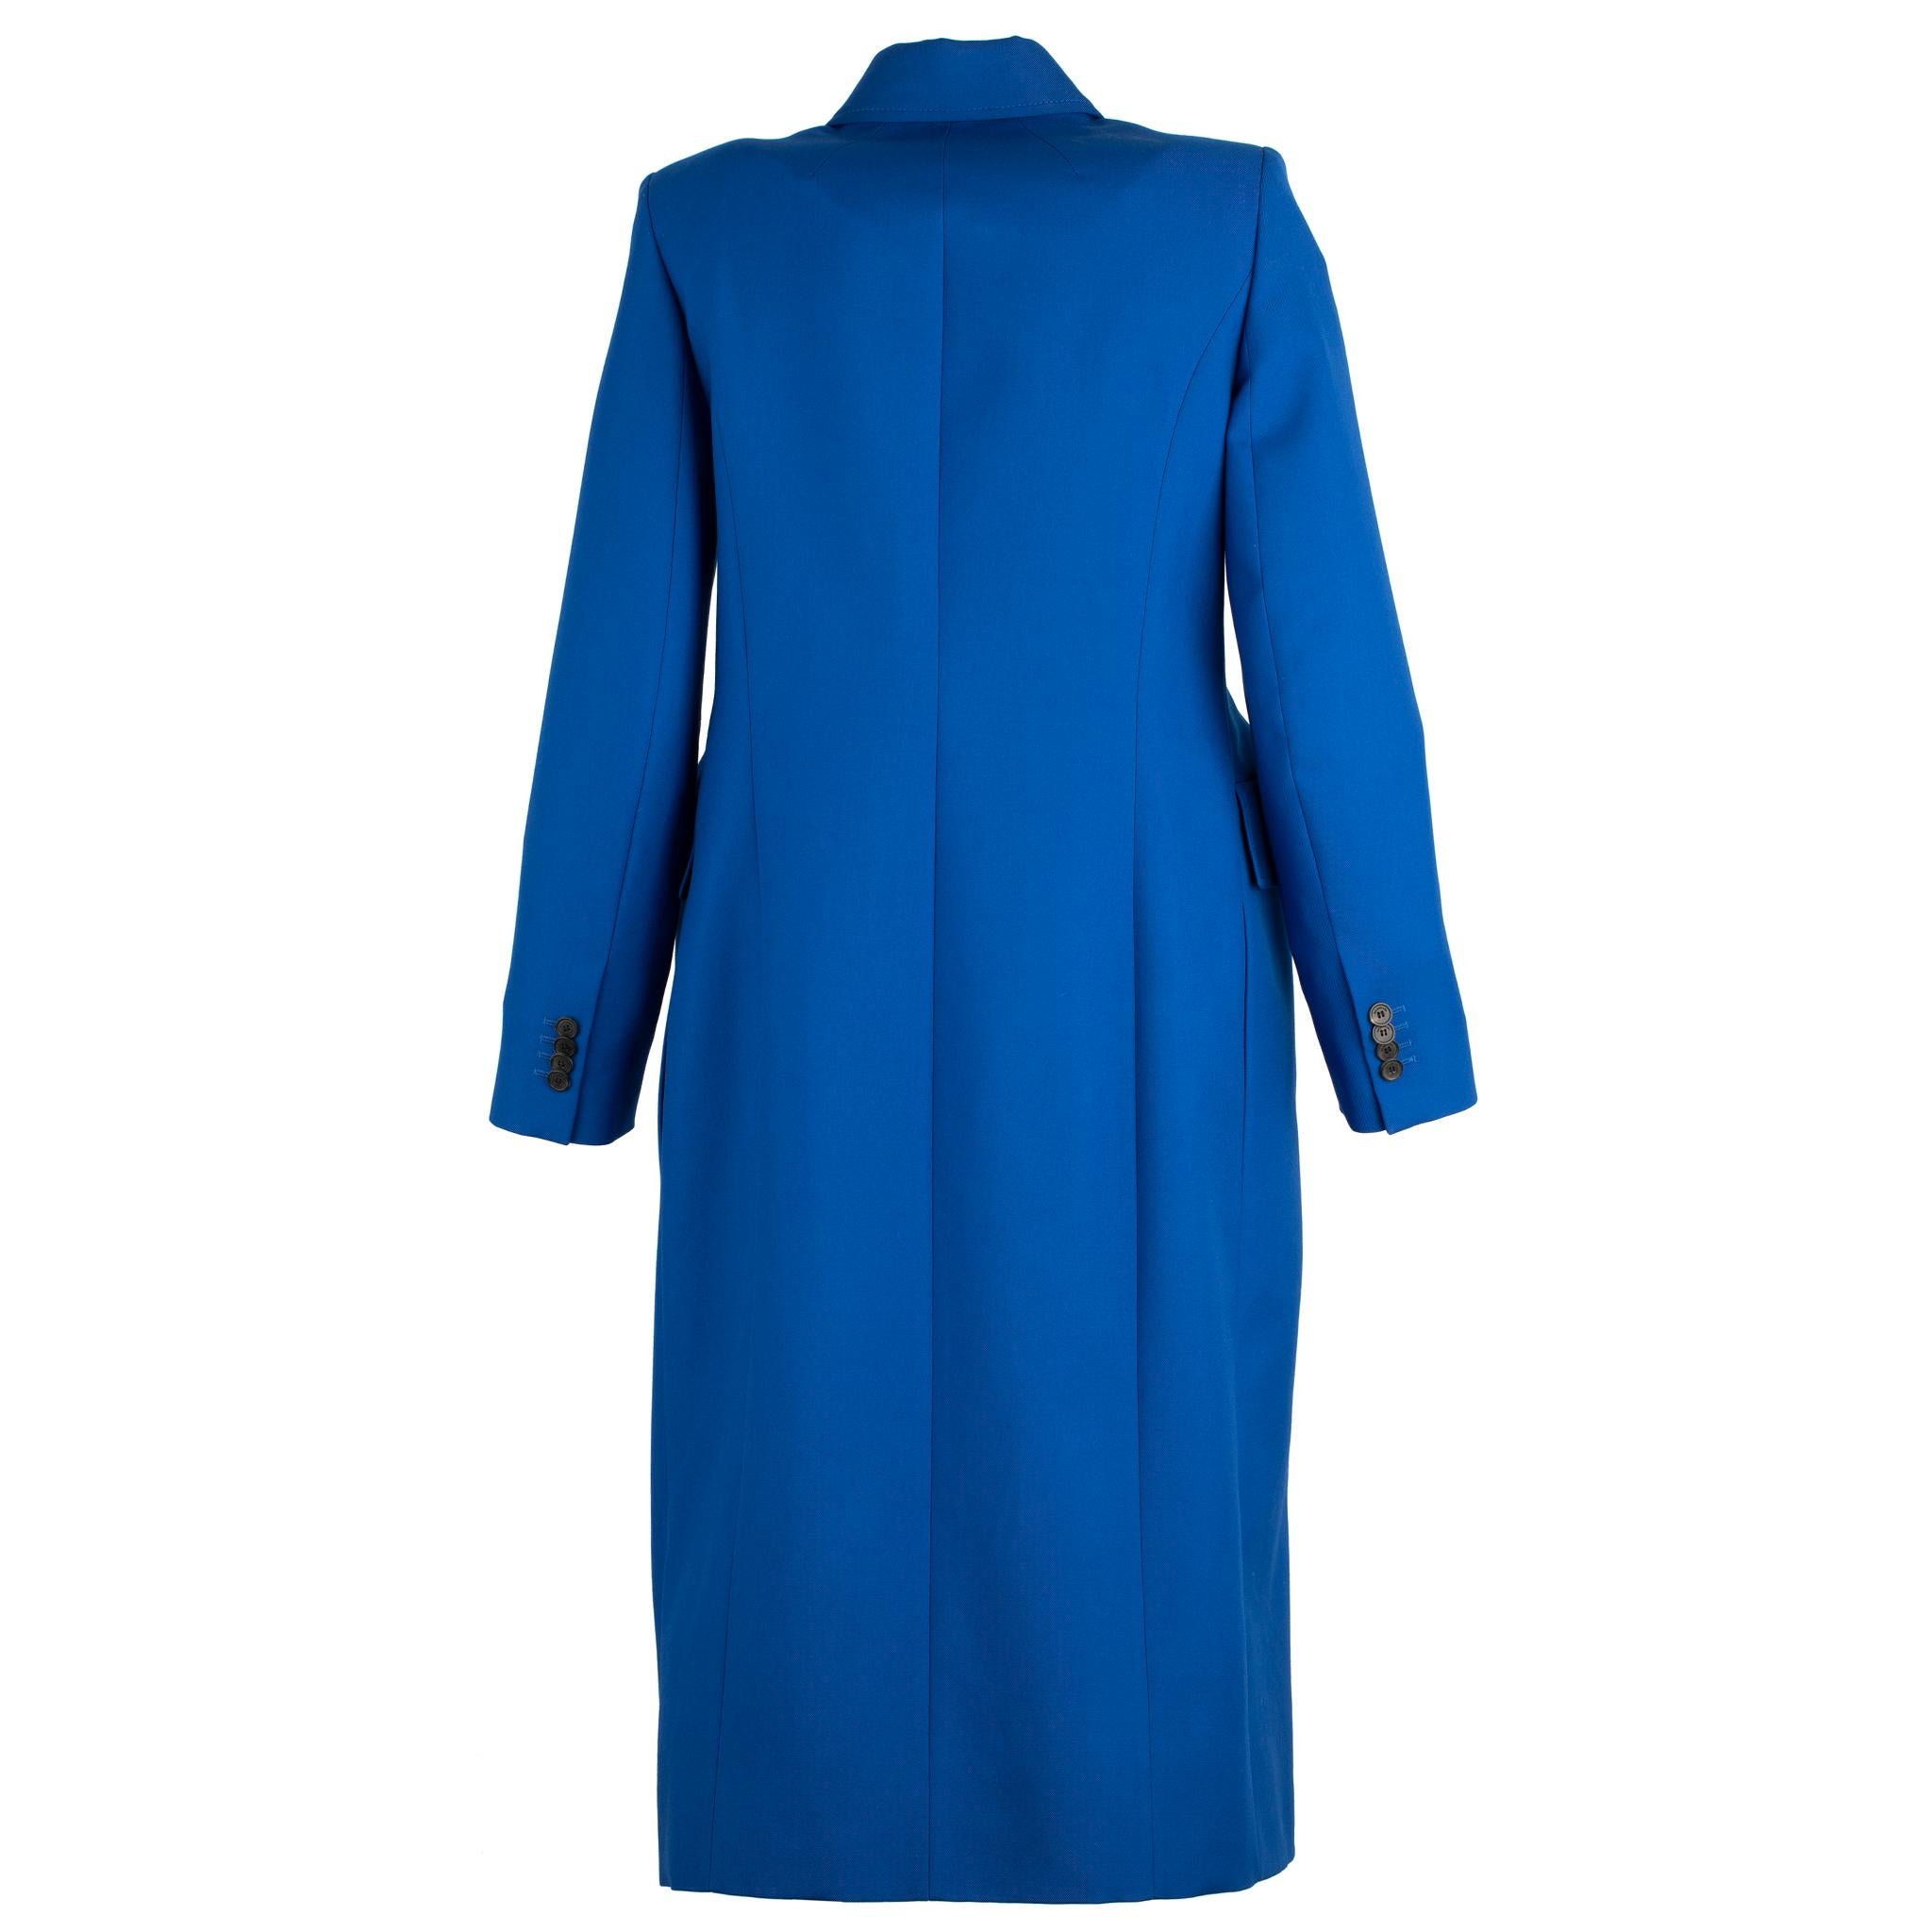 Balenciaga Hourglass Double Breasted Wool Blend Coat Royal Blue 38 FR For Sale 5